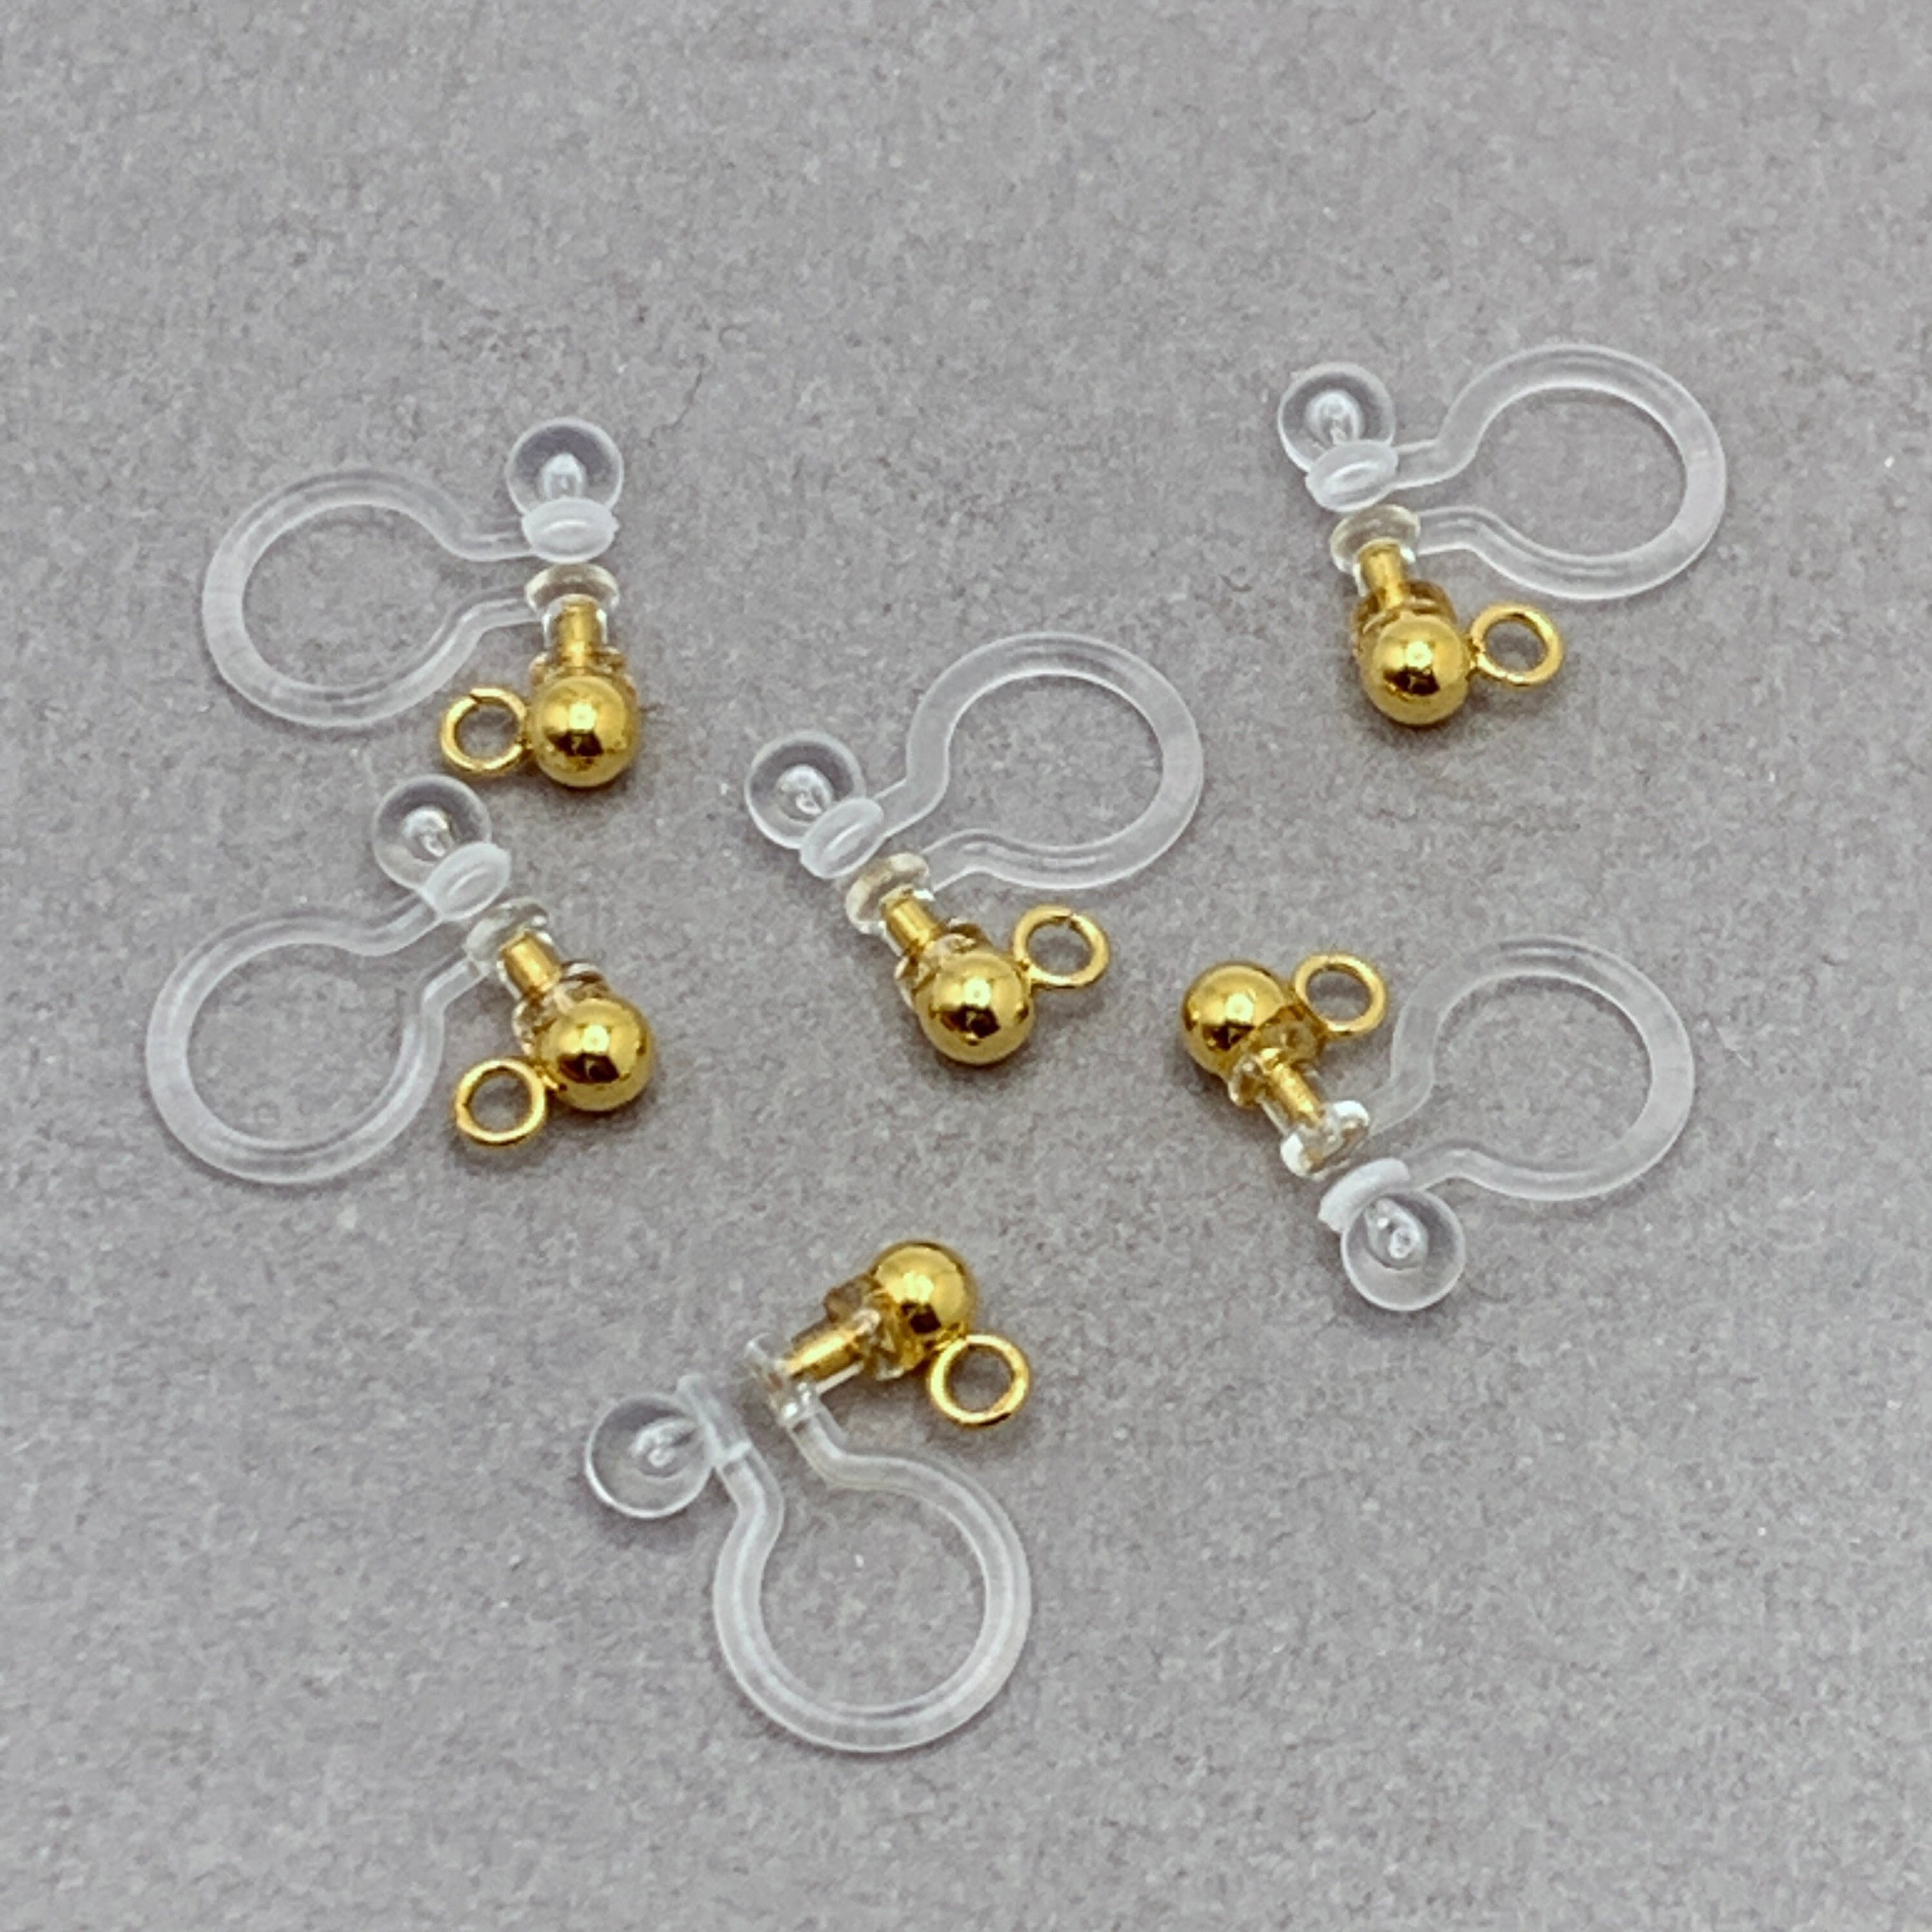 24/48pcs 3mm Jewelry Cord Ends 9x3mm FIN1042 